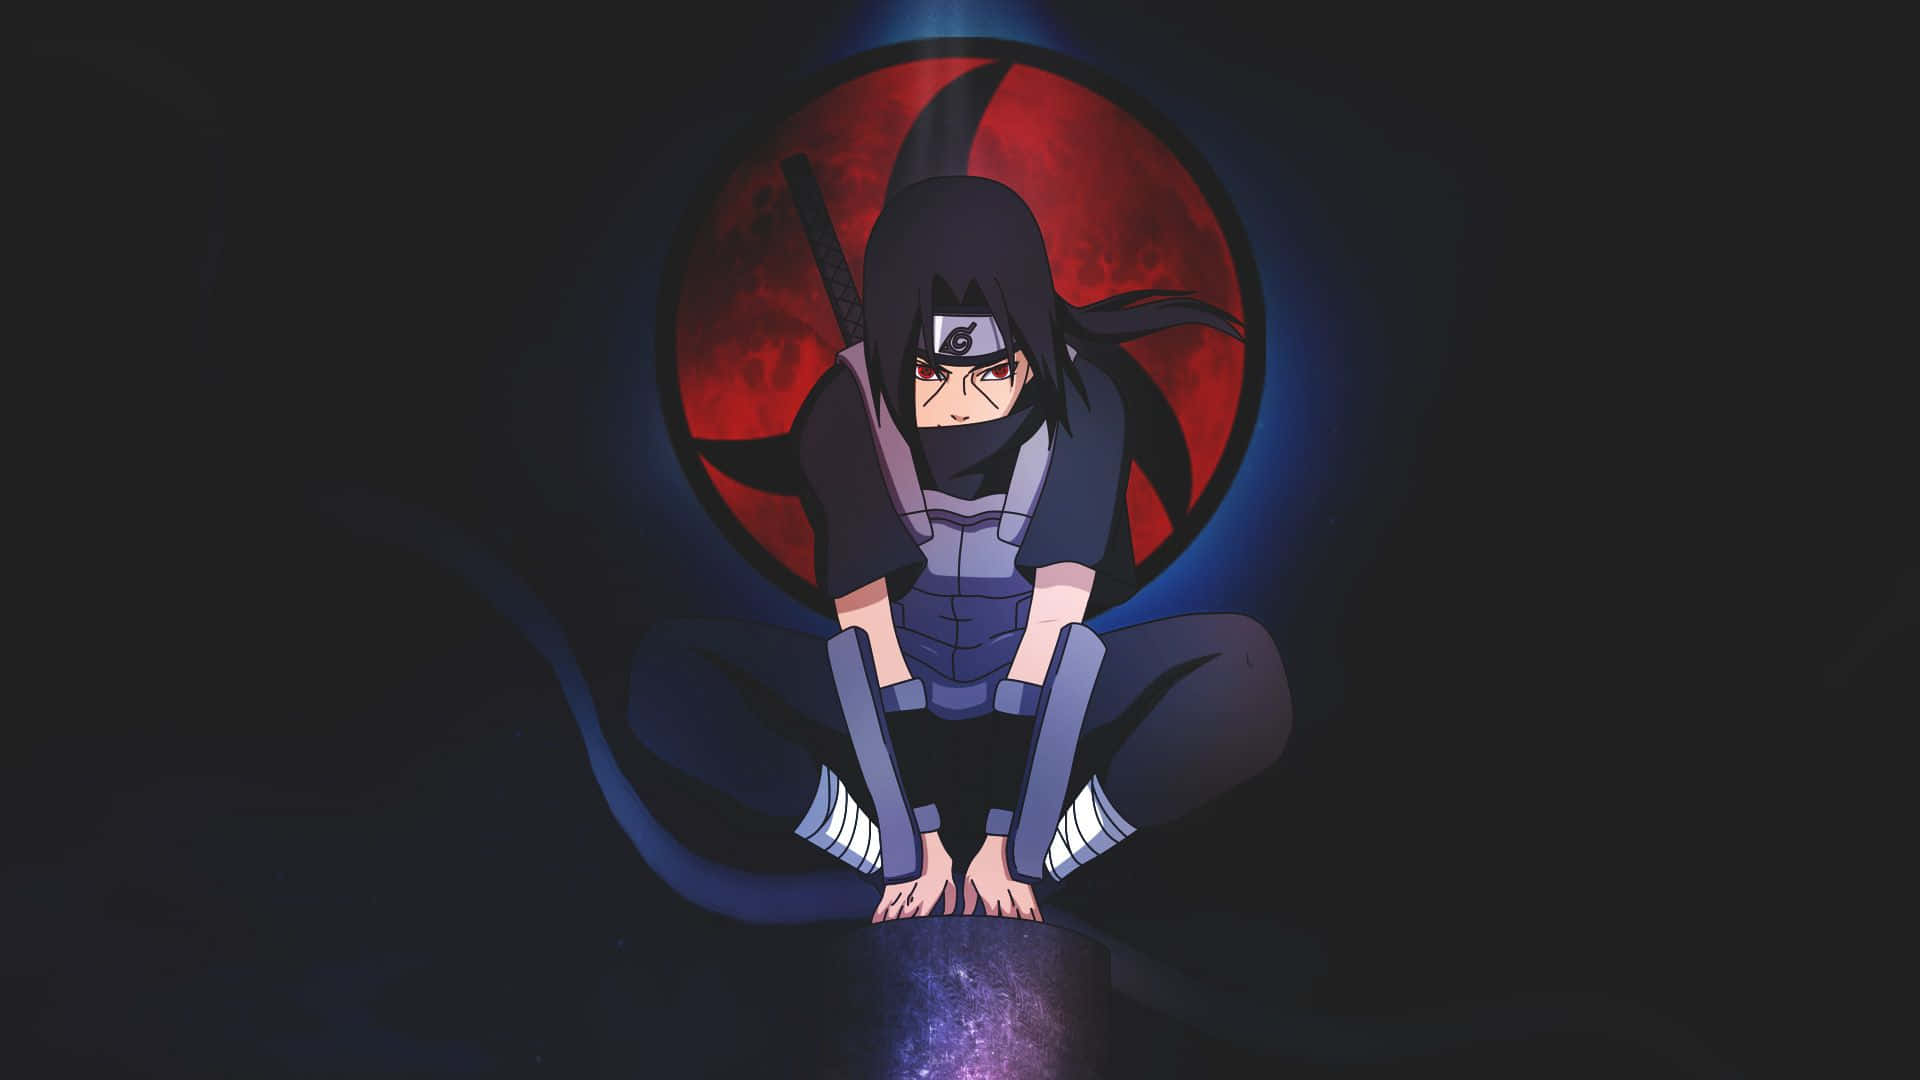 Itachi Aesthetic Looking Down With Frog Seat With Sharingan Eyes In Background Wallpaper